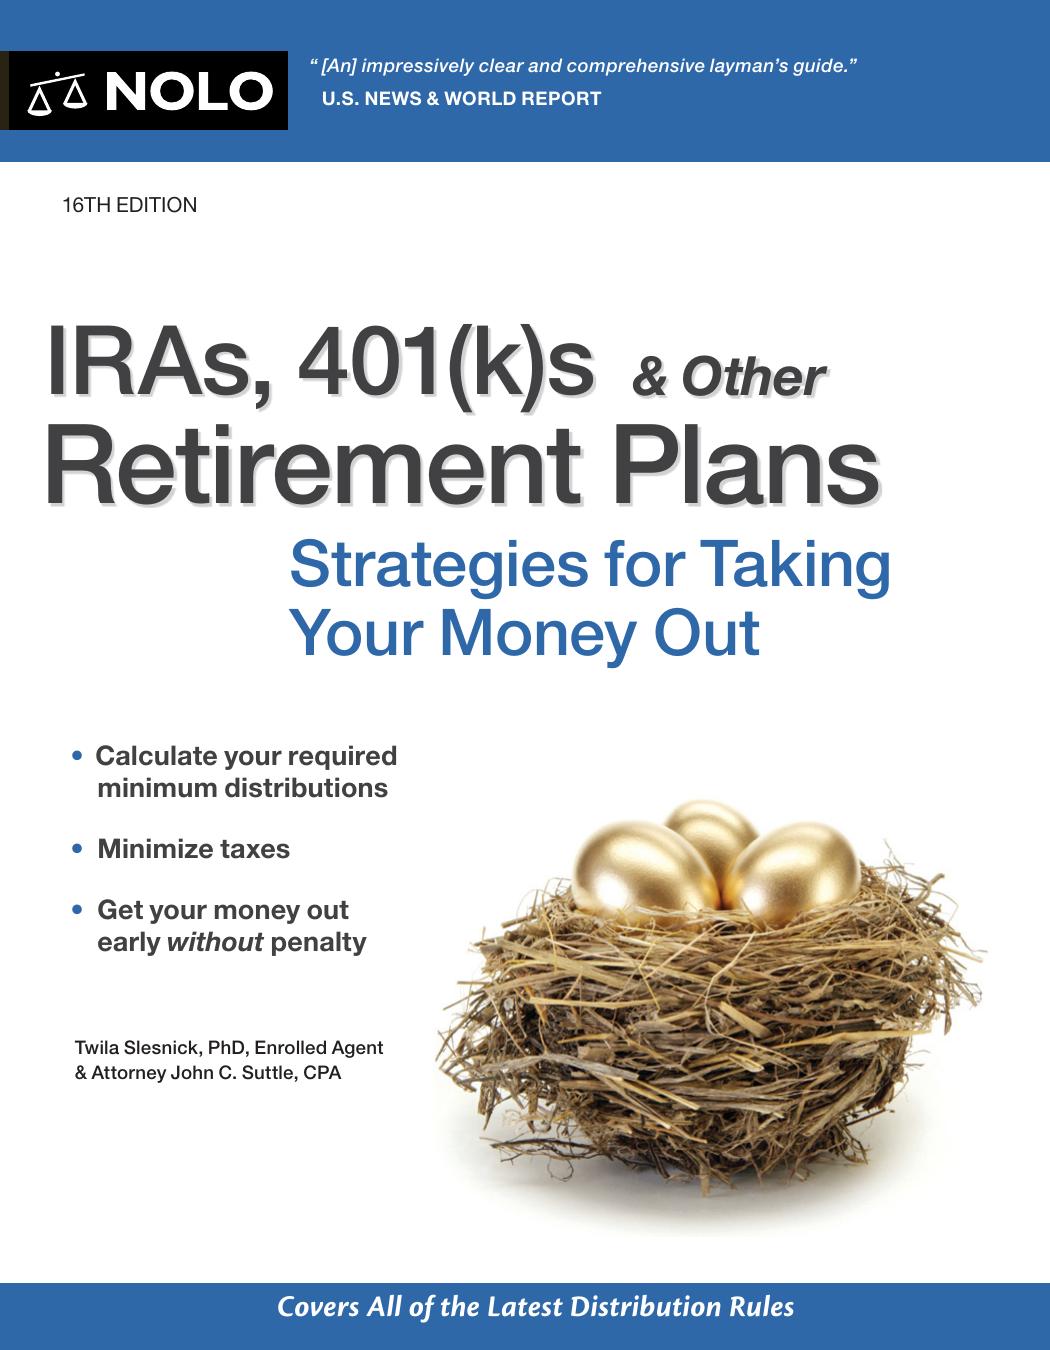 IRAs, 401(k)s & Other Retirement Plans: Strategies for Taking Your Money Out by Twila Slesnick PhD Enrolled Agent John C. Suttle Attorney